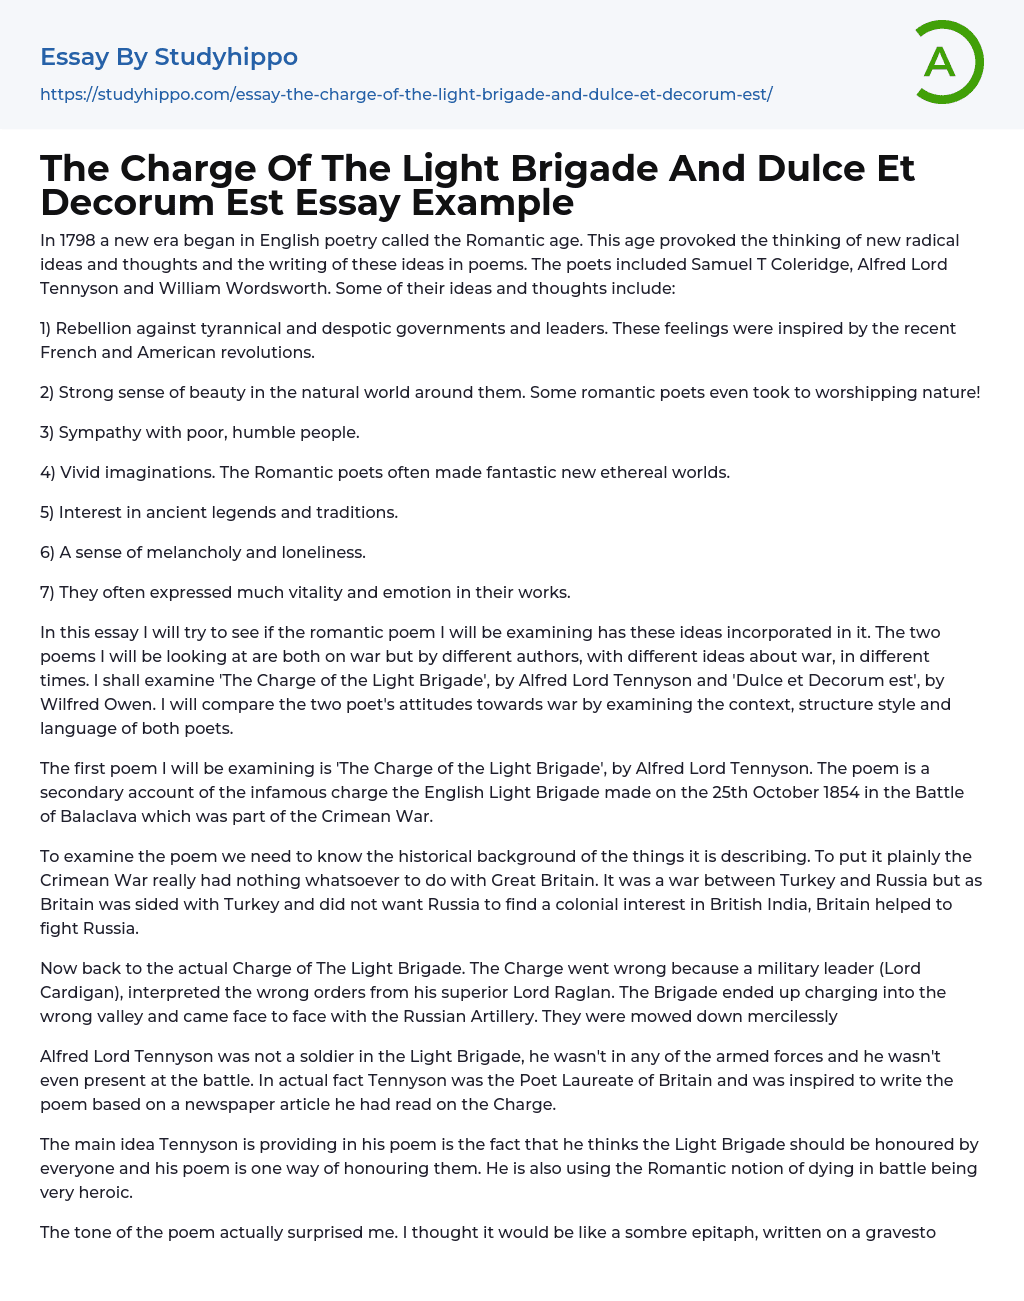 The Charge Of The Light Brigade And Dulce Et Decorum Est Essay Example